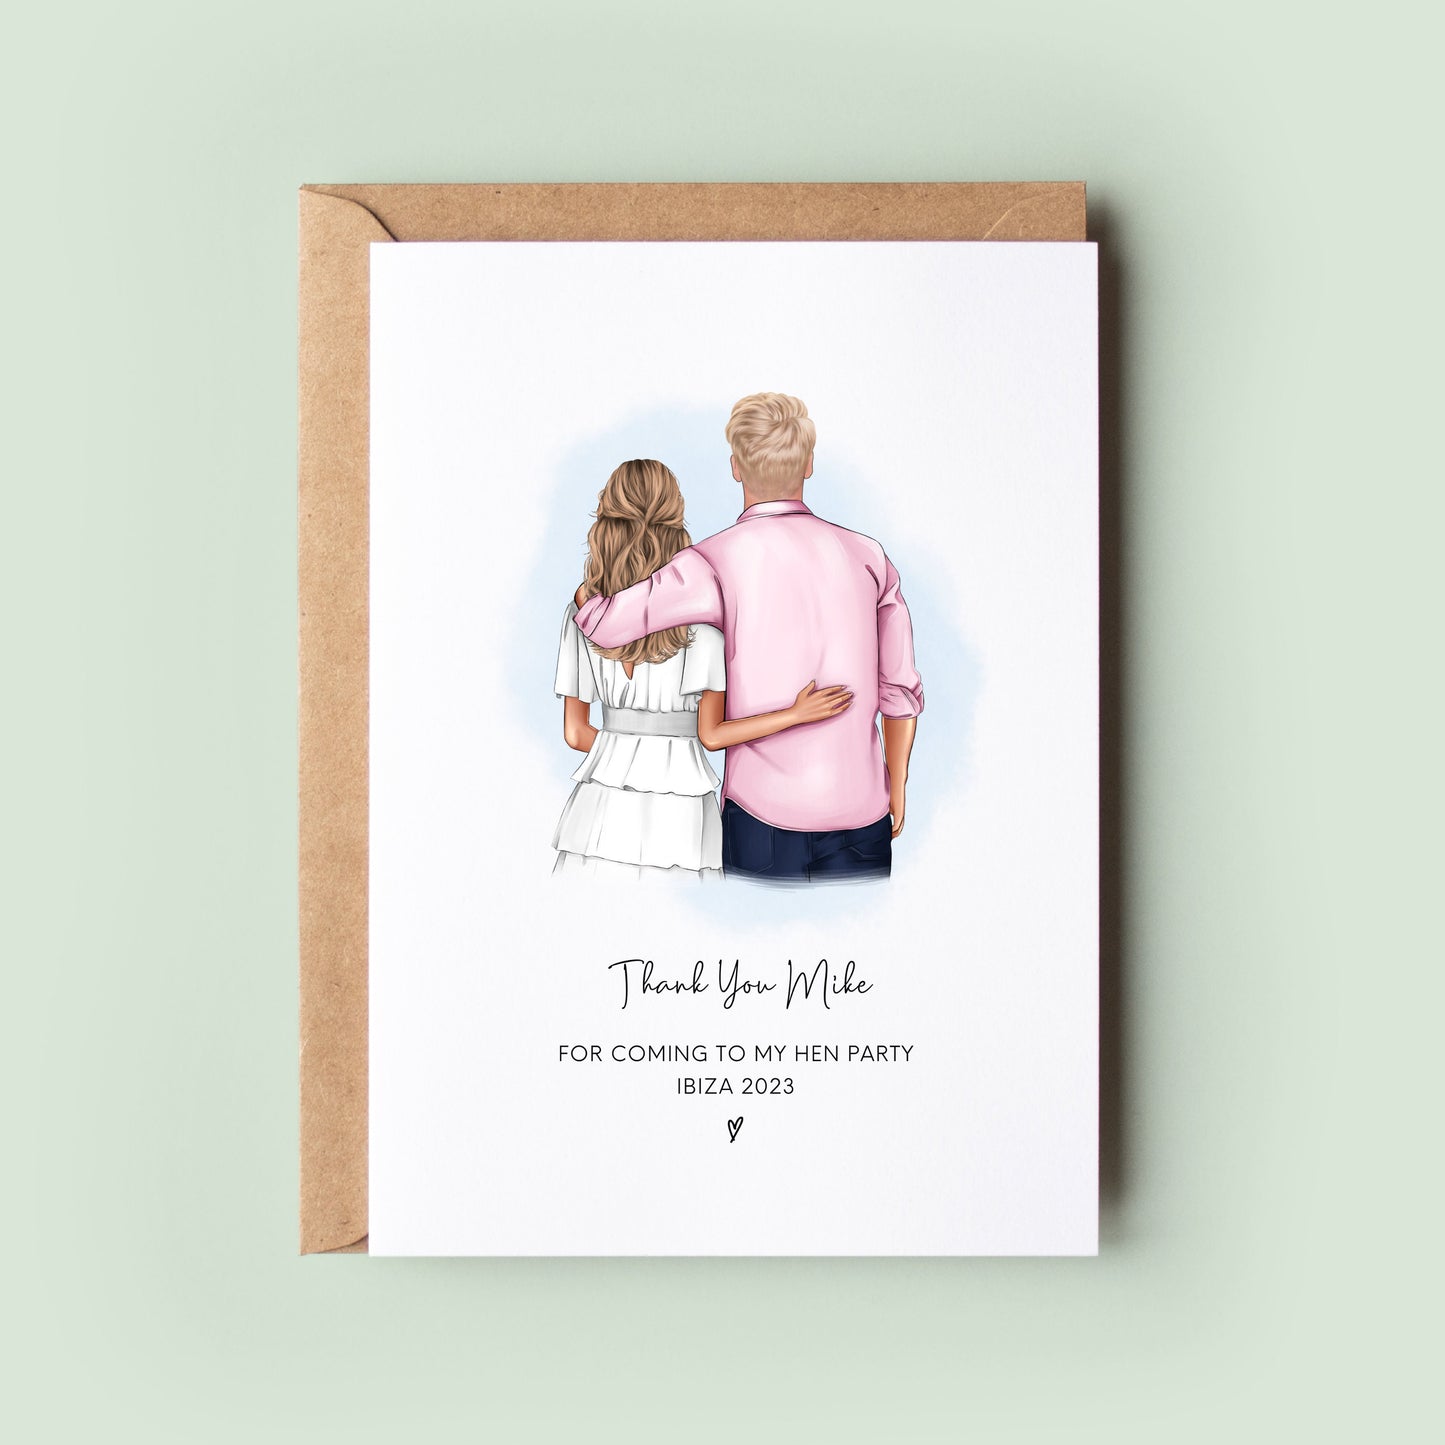 Personalised Thank You For Arranging My Hen Party Card, Bridal Shower Thank You Card, Hen Party Thank You Card, Bridesmaid Card, Bridesman